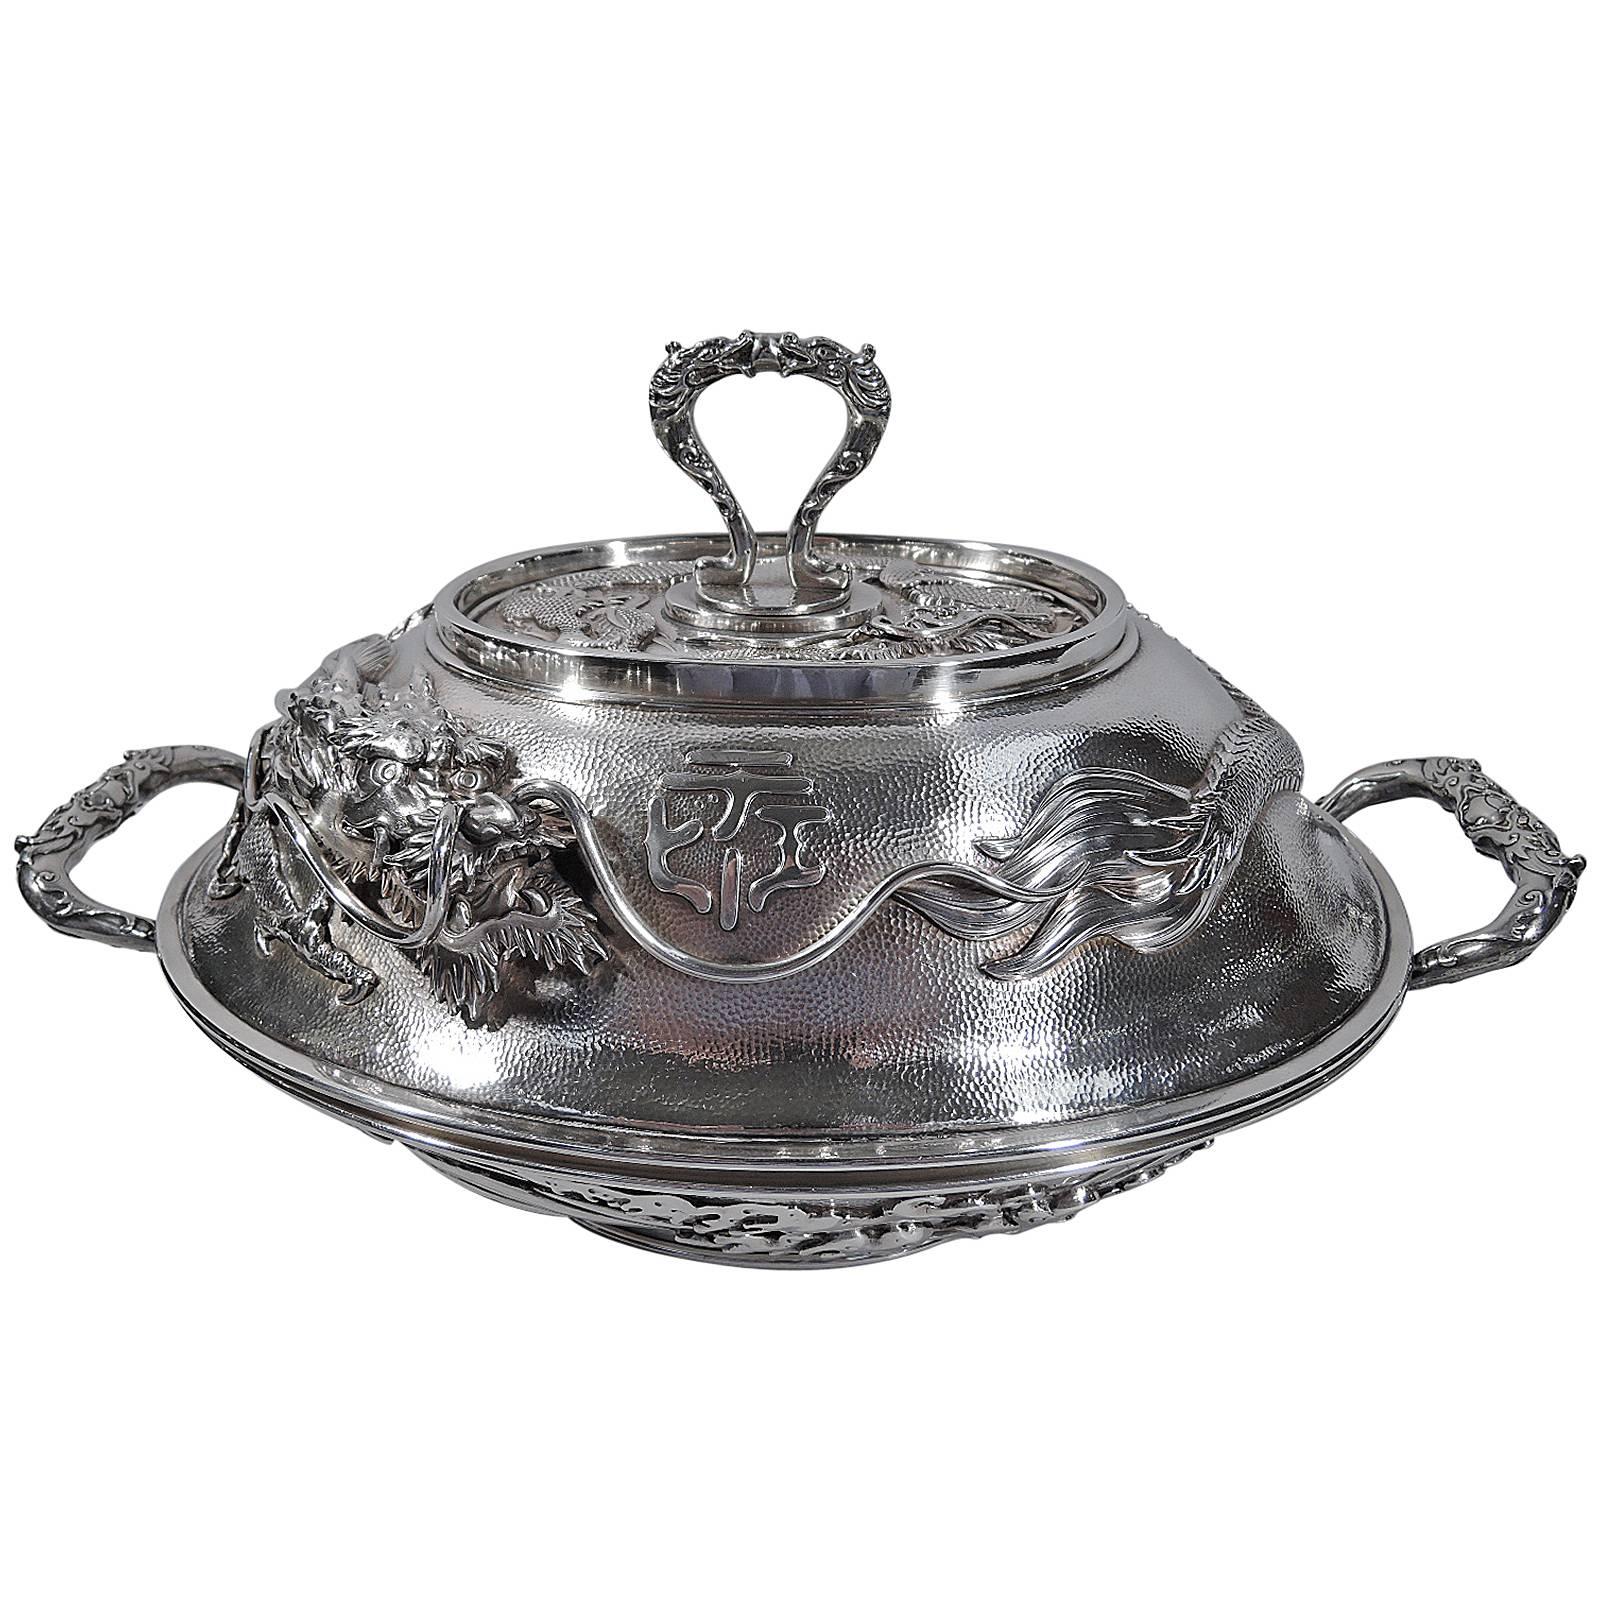 Large Japanese Sterling Silver Covered Dragon Tureen by Arthur & Bond